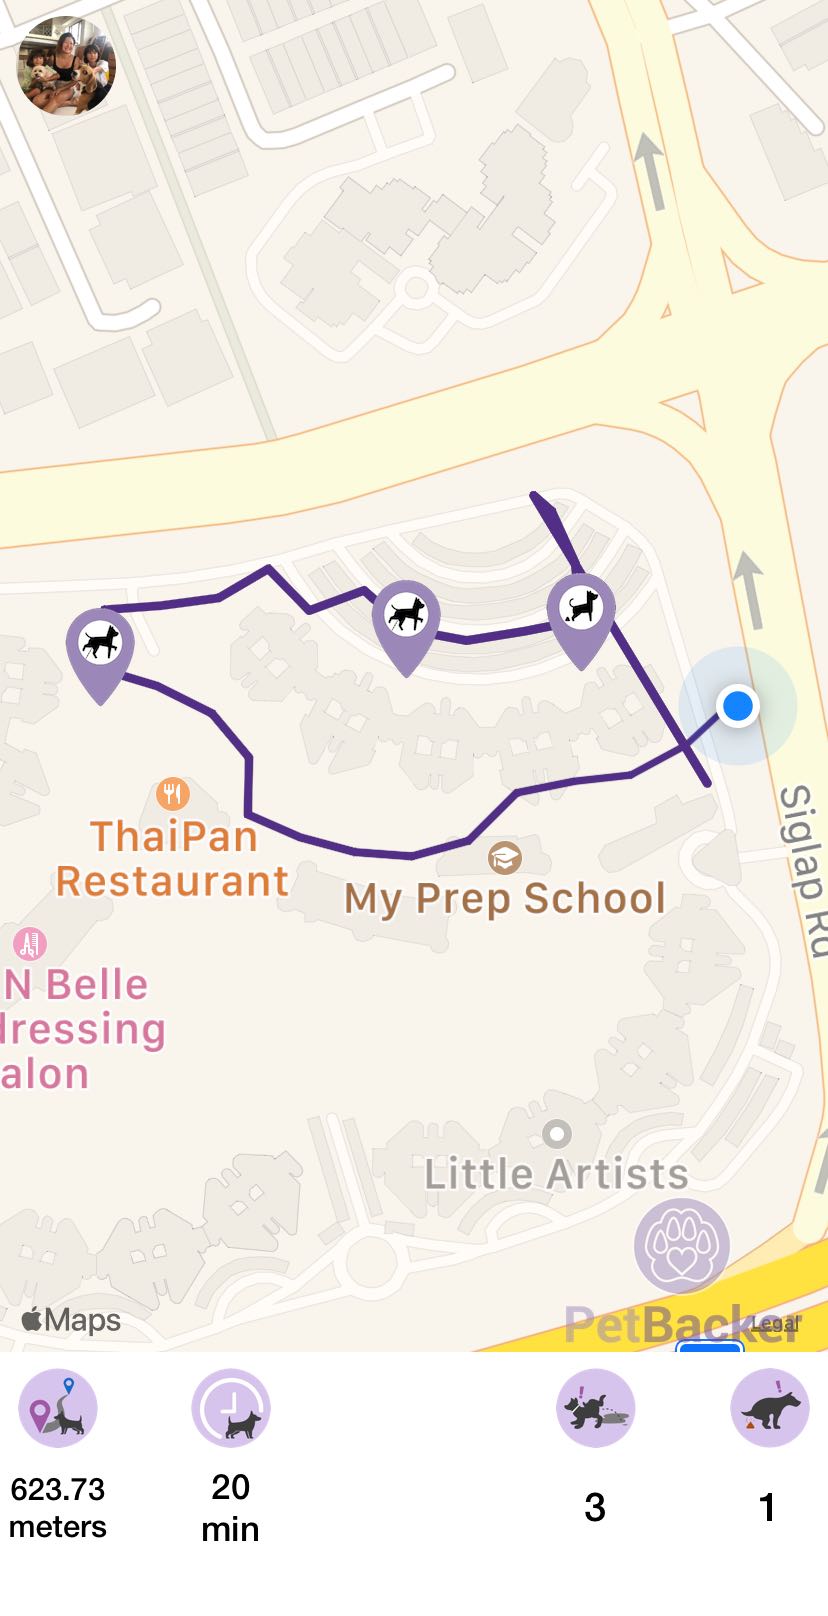 Just completed pet walking of 644.11 meters with Nicky